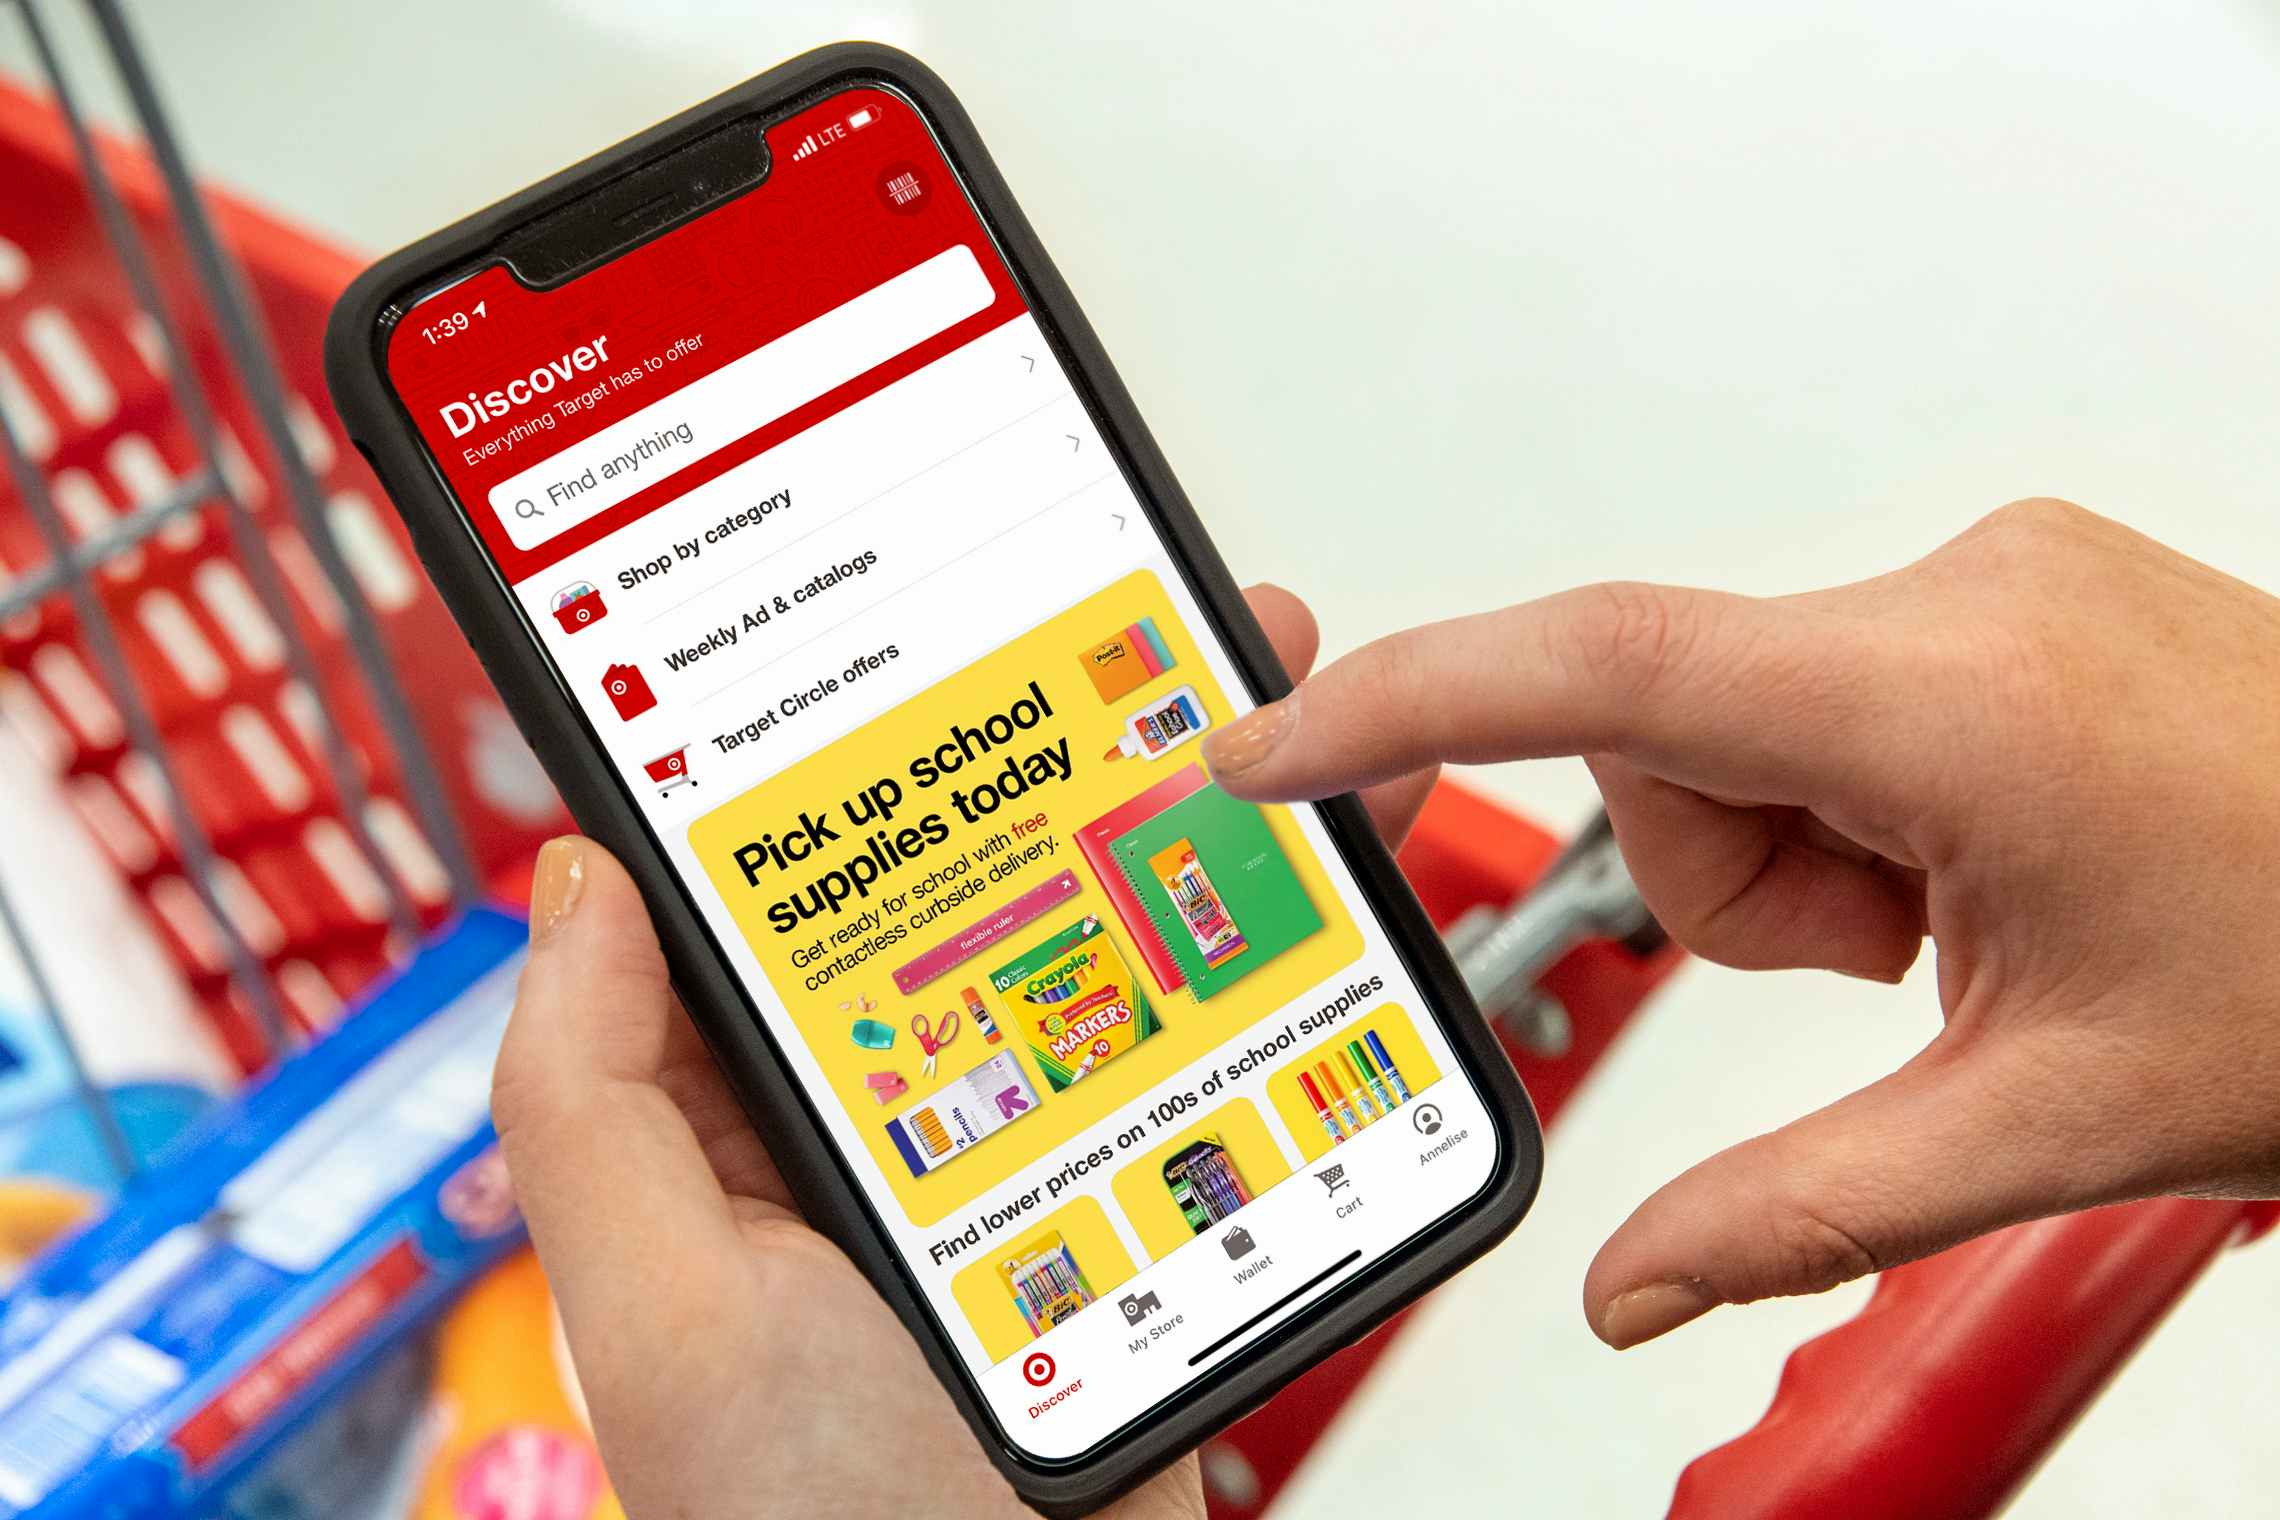 Target app with the back to school page open on the screen.